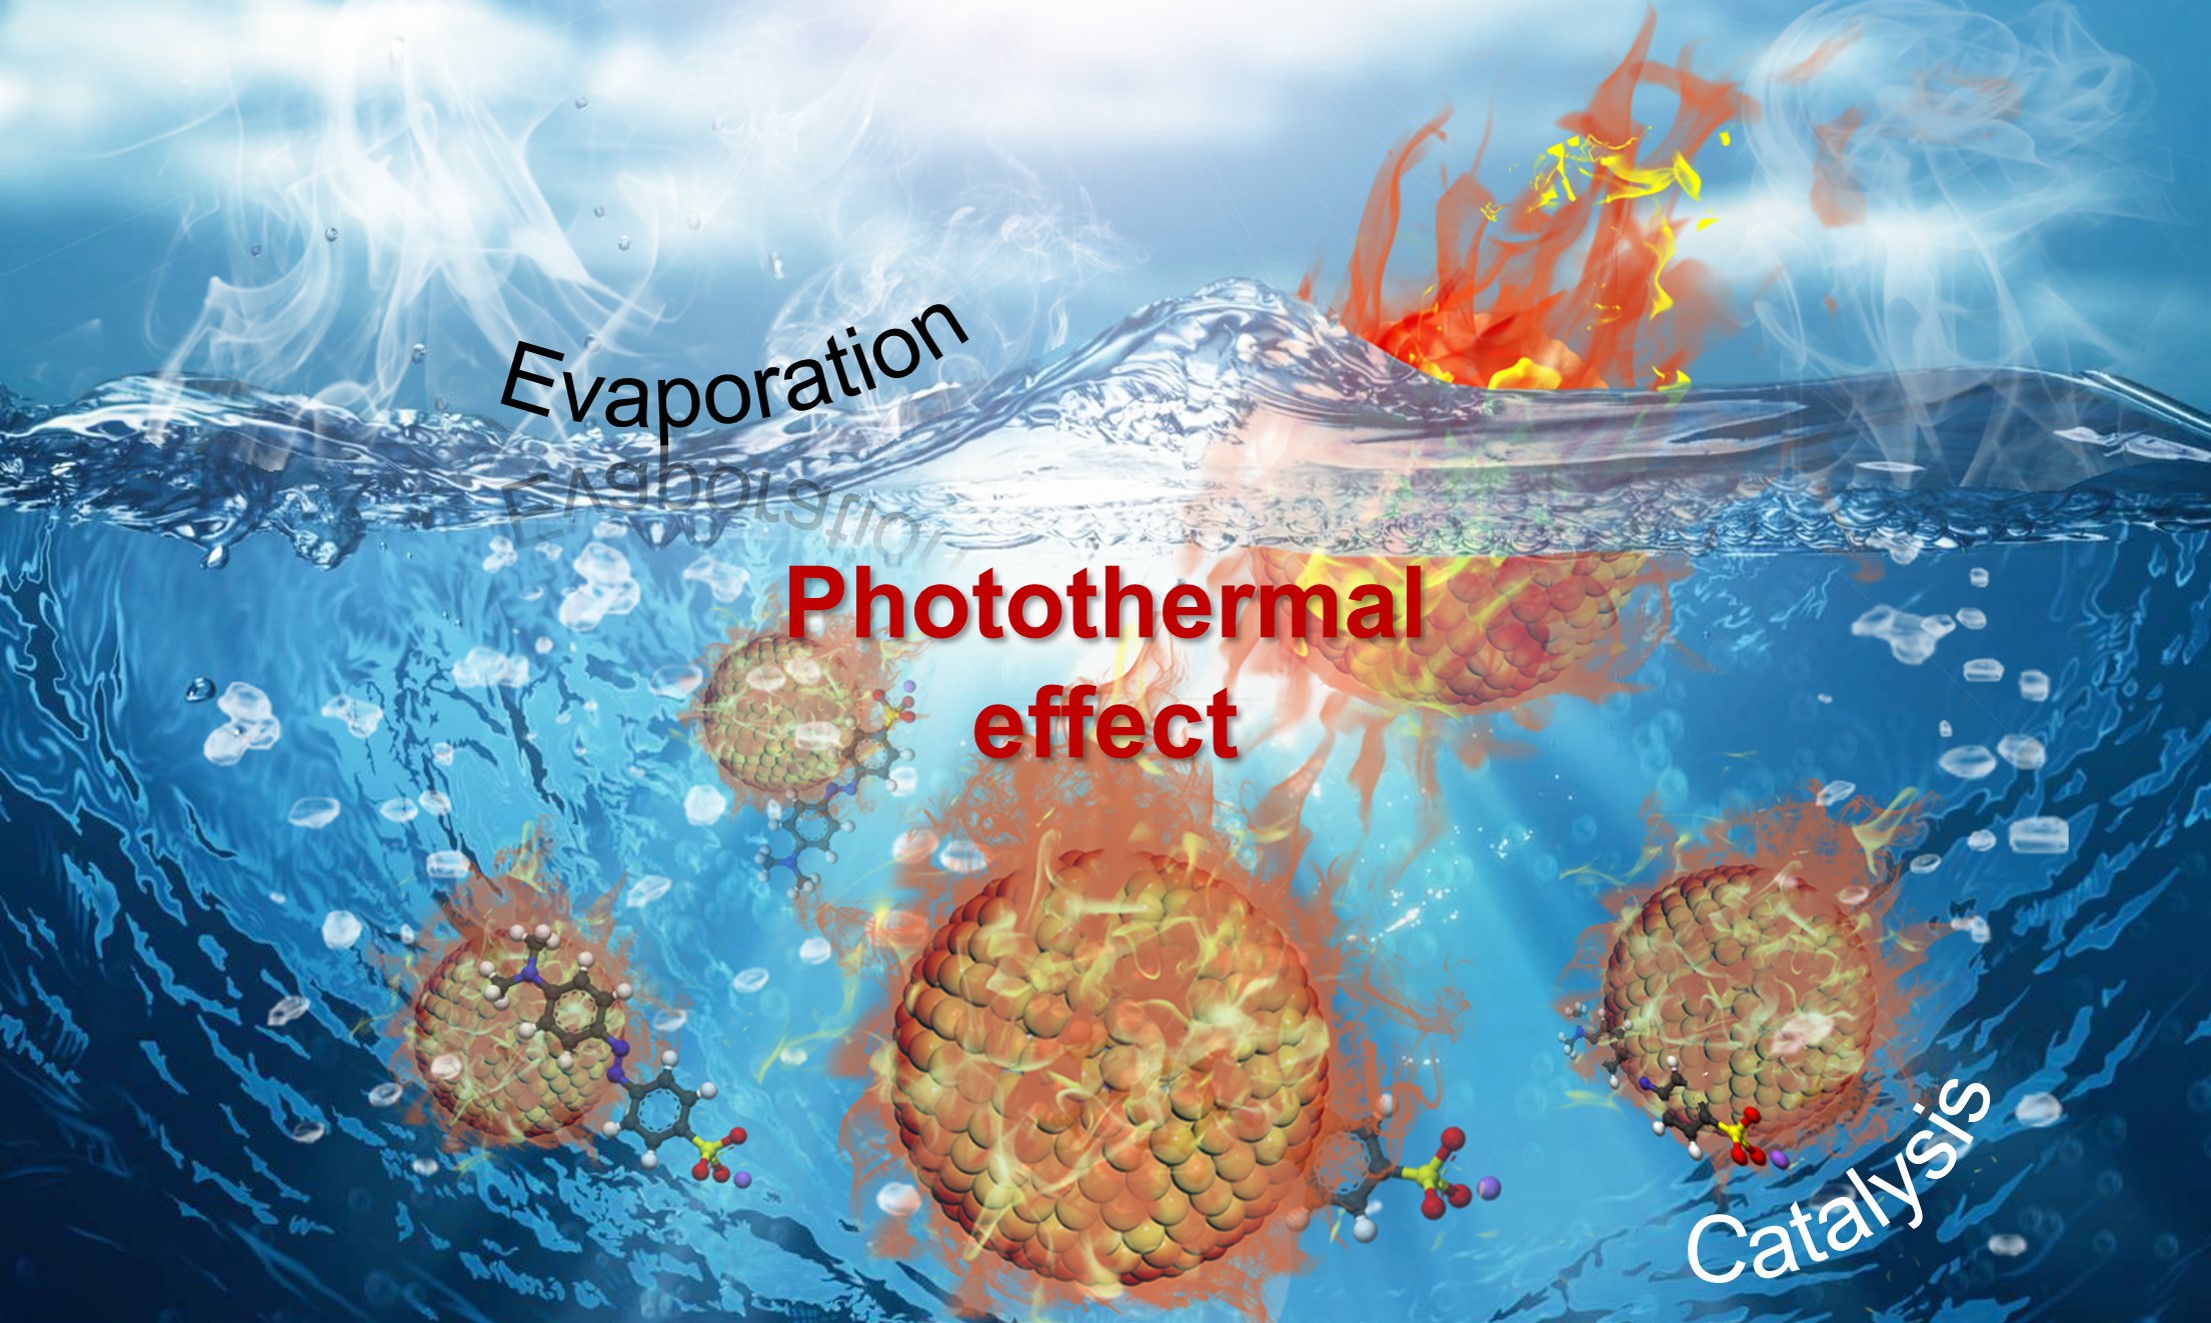 Solar-driven photothermal nanostructured materials designs and prerequisites for evaporation and catalysis applications